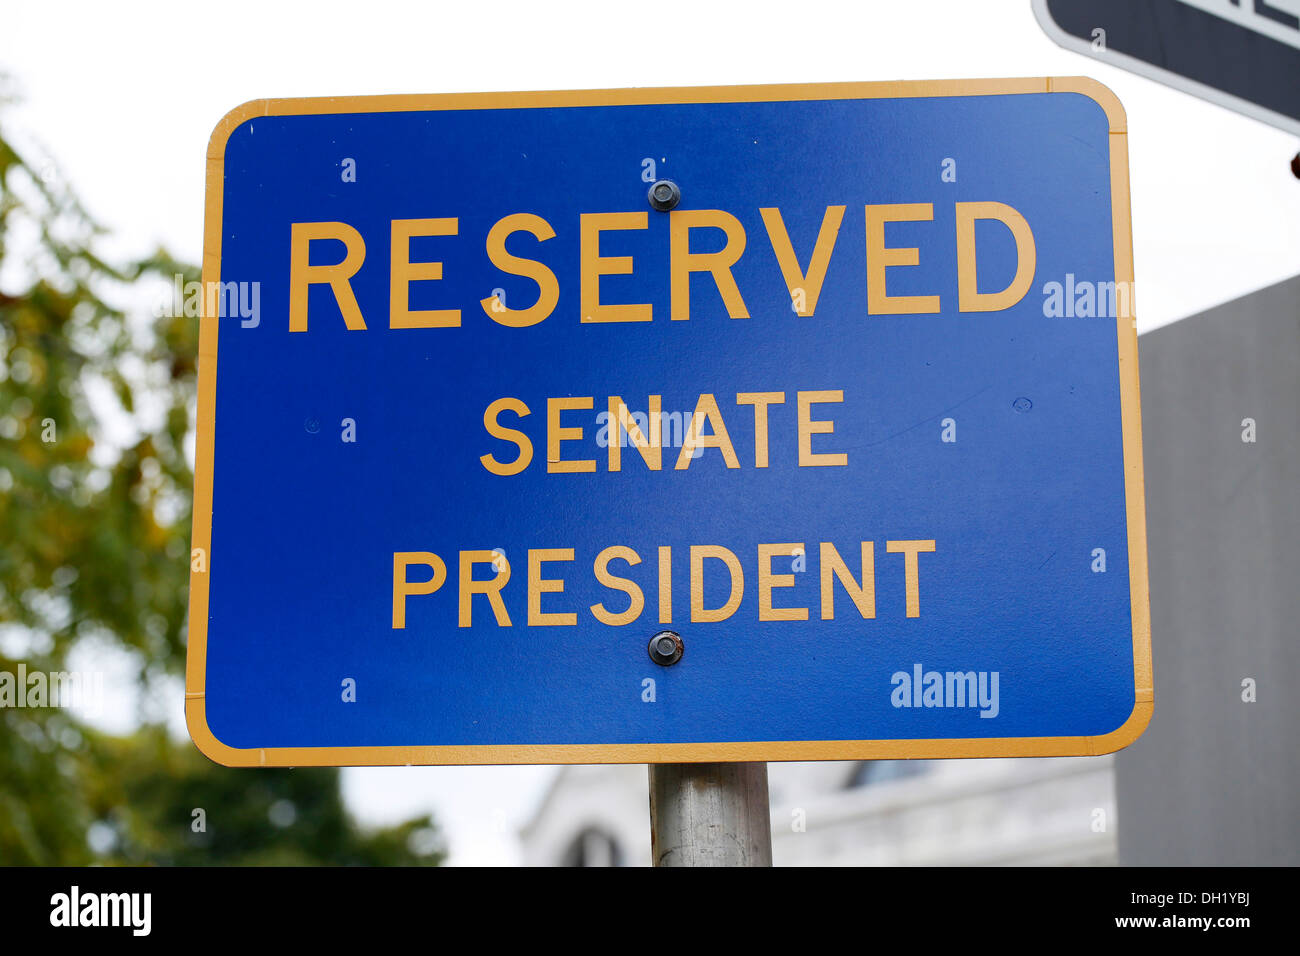 Reserved parking space for the senate president, Concord, New Hampshire, USA Stock Photo